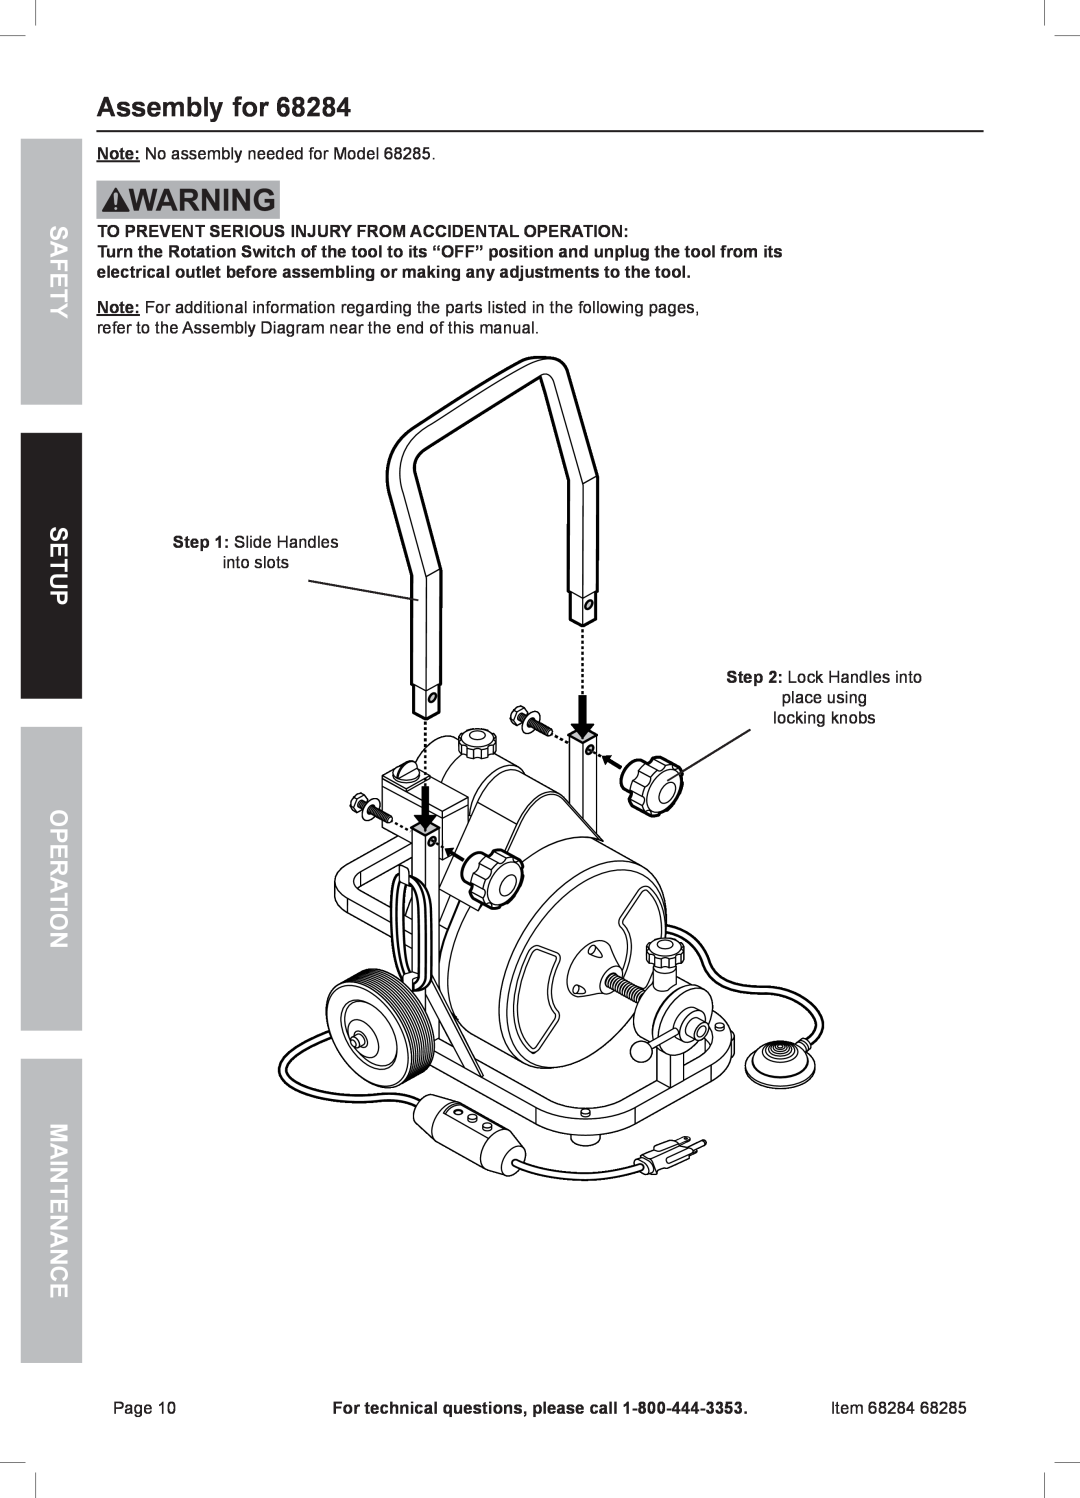 Harbor Freight Tools 68285, 68284 owner manual Assembly for, Safety Setup Operation Maintenance 